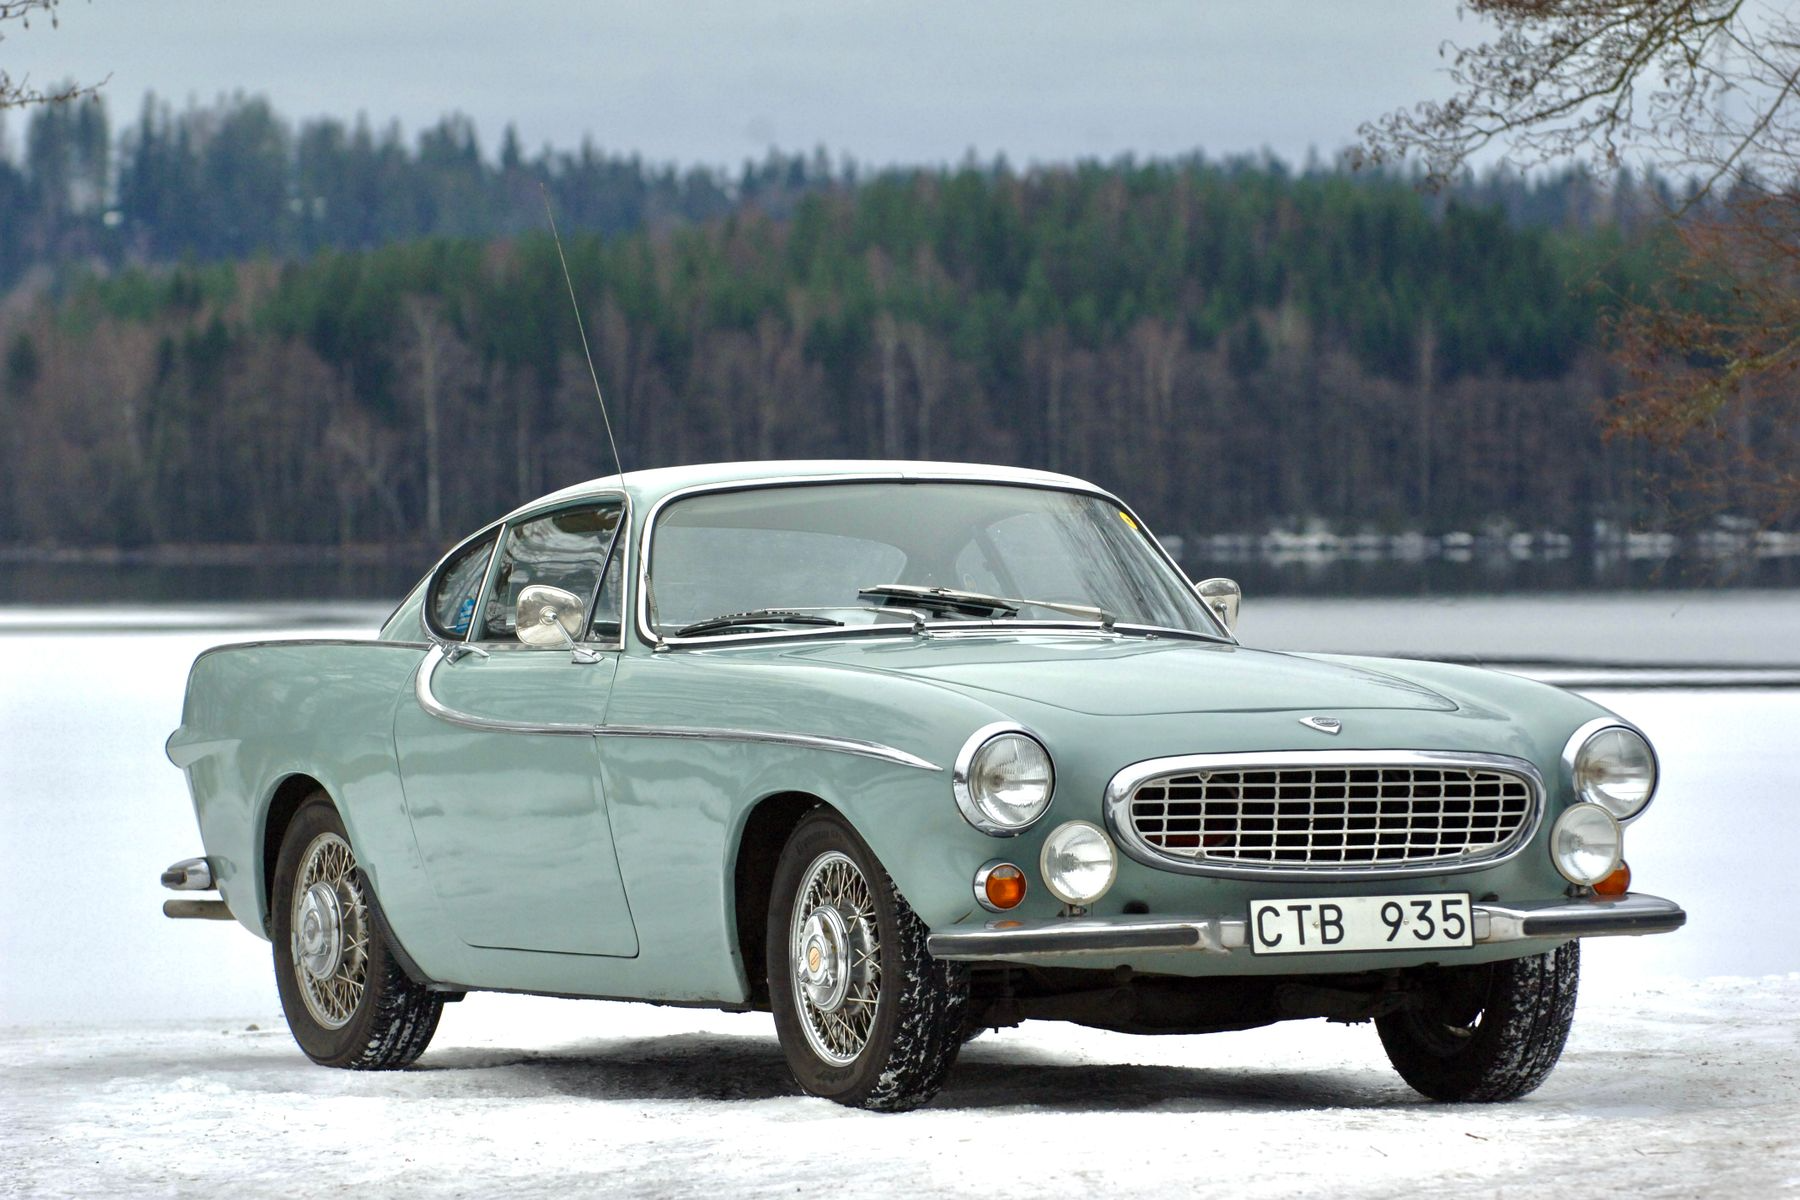 King of Swedens Volvo 1800S 8